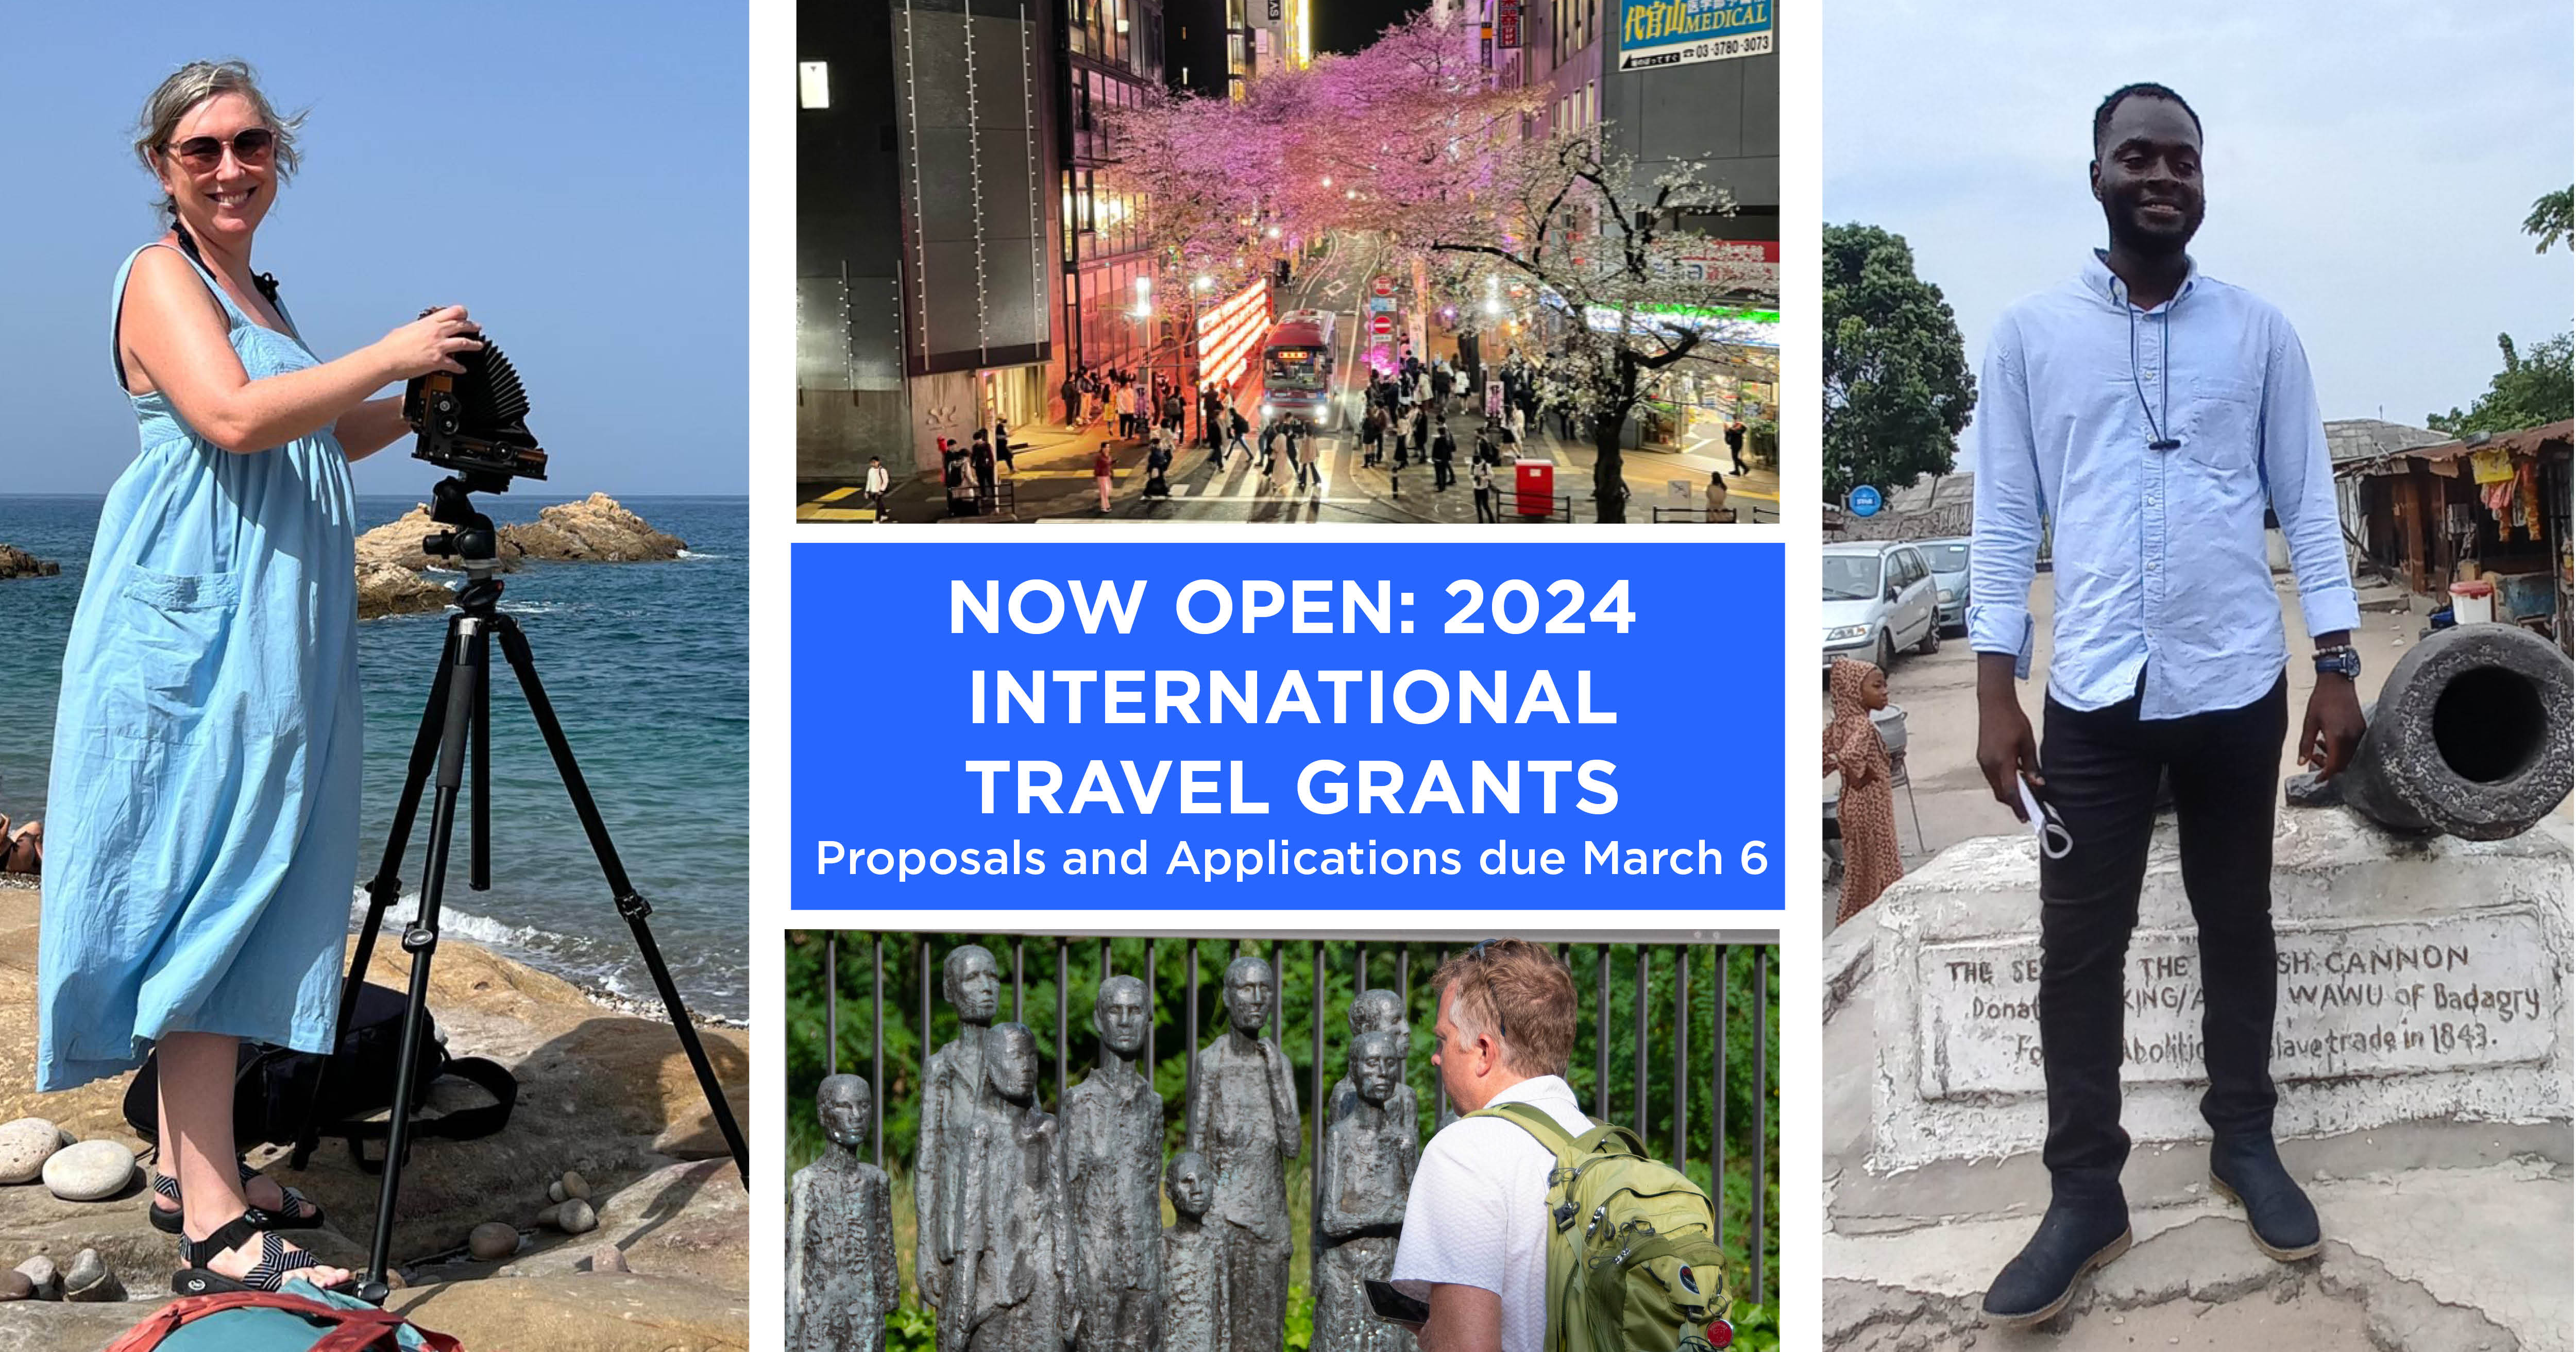 Photos of KU faculty abroad with camera equipment at beach, visiting historical sites. Also: A busy city intersection. Text reads: Now open: 2024 International Travel Grants. Proposals and applications due March 6.